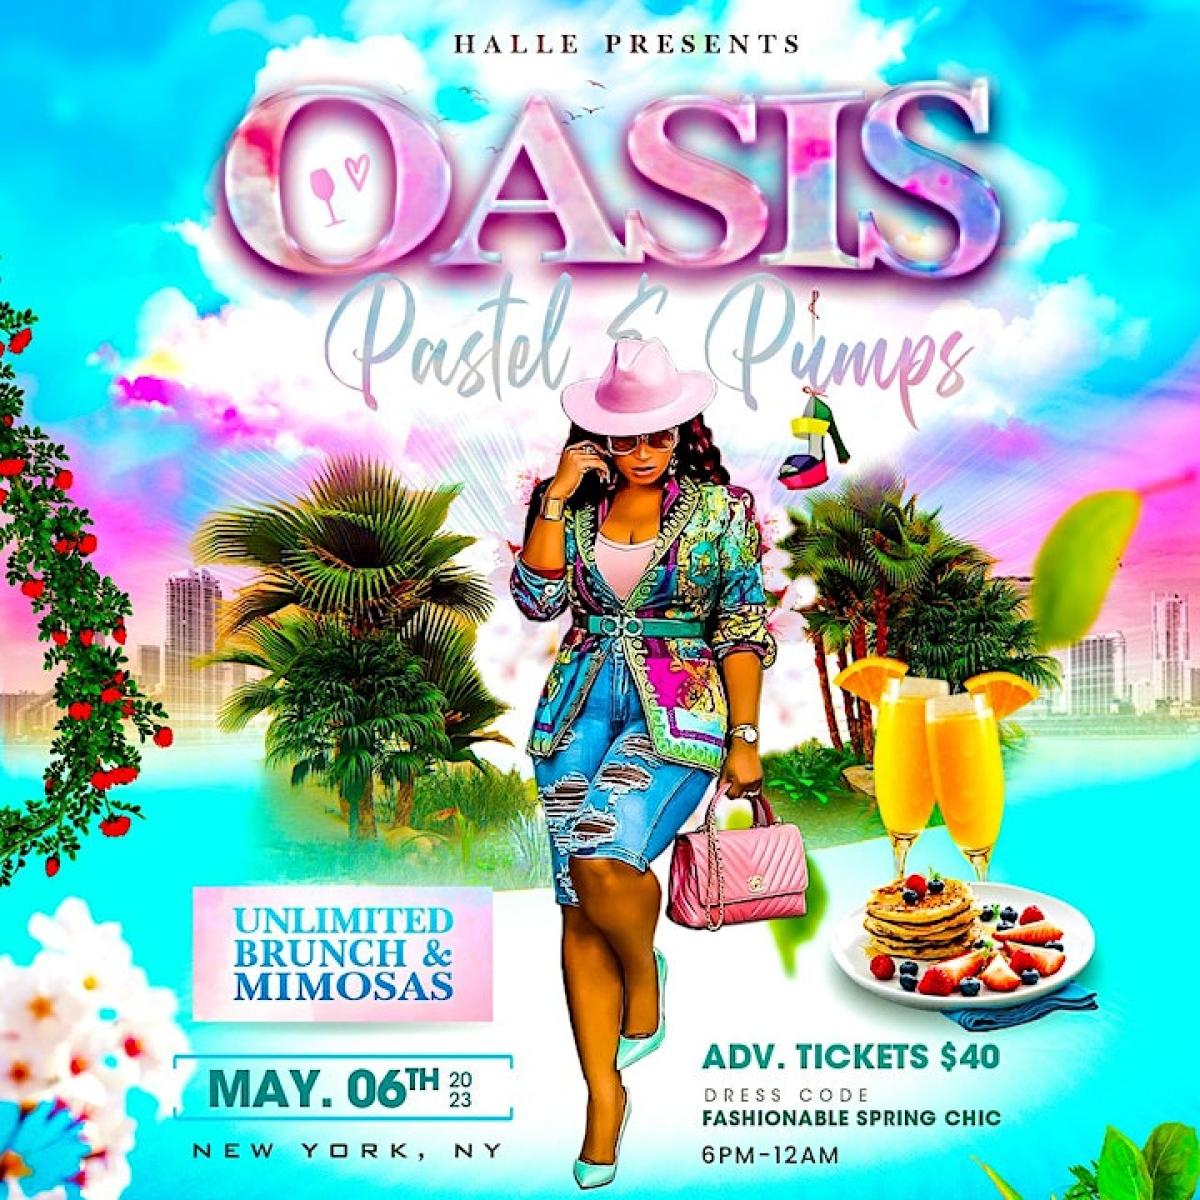 Oasis : Pastel + Pumps flyer or graphic.